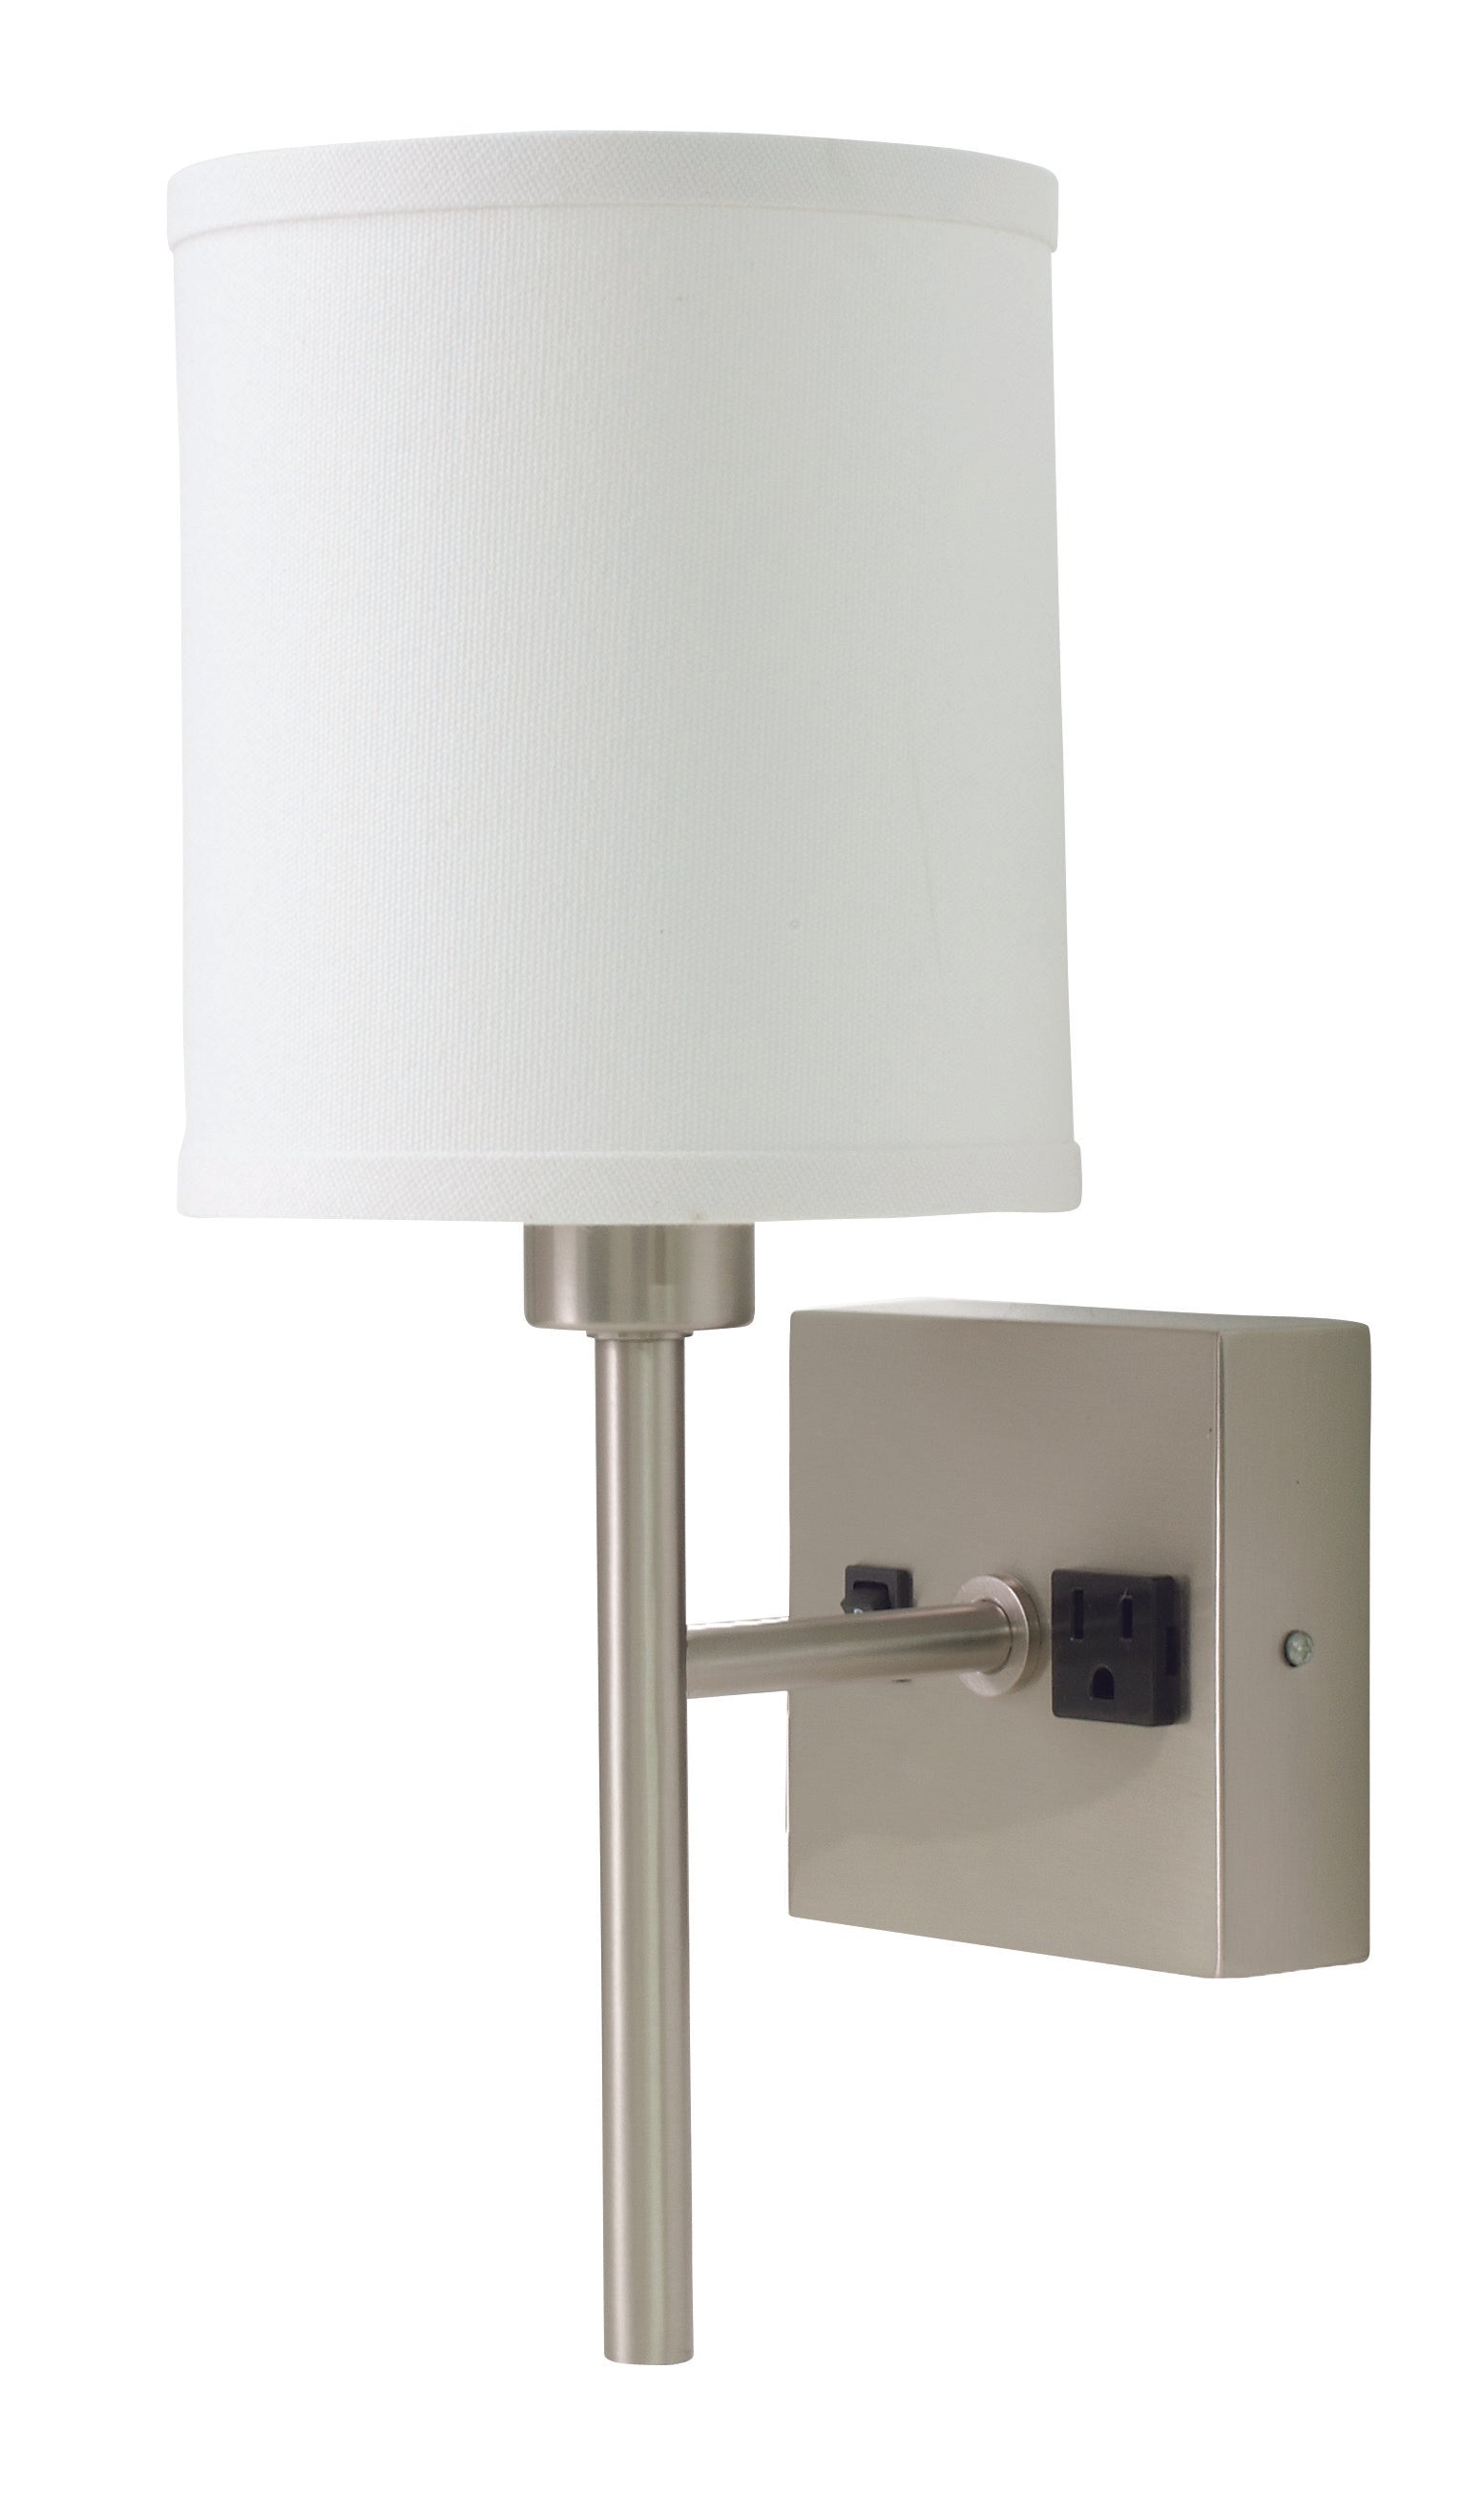 House of Troy Wall Lamp in Satin Nickel with Convenience Outlet WL625-SN